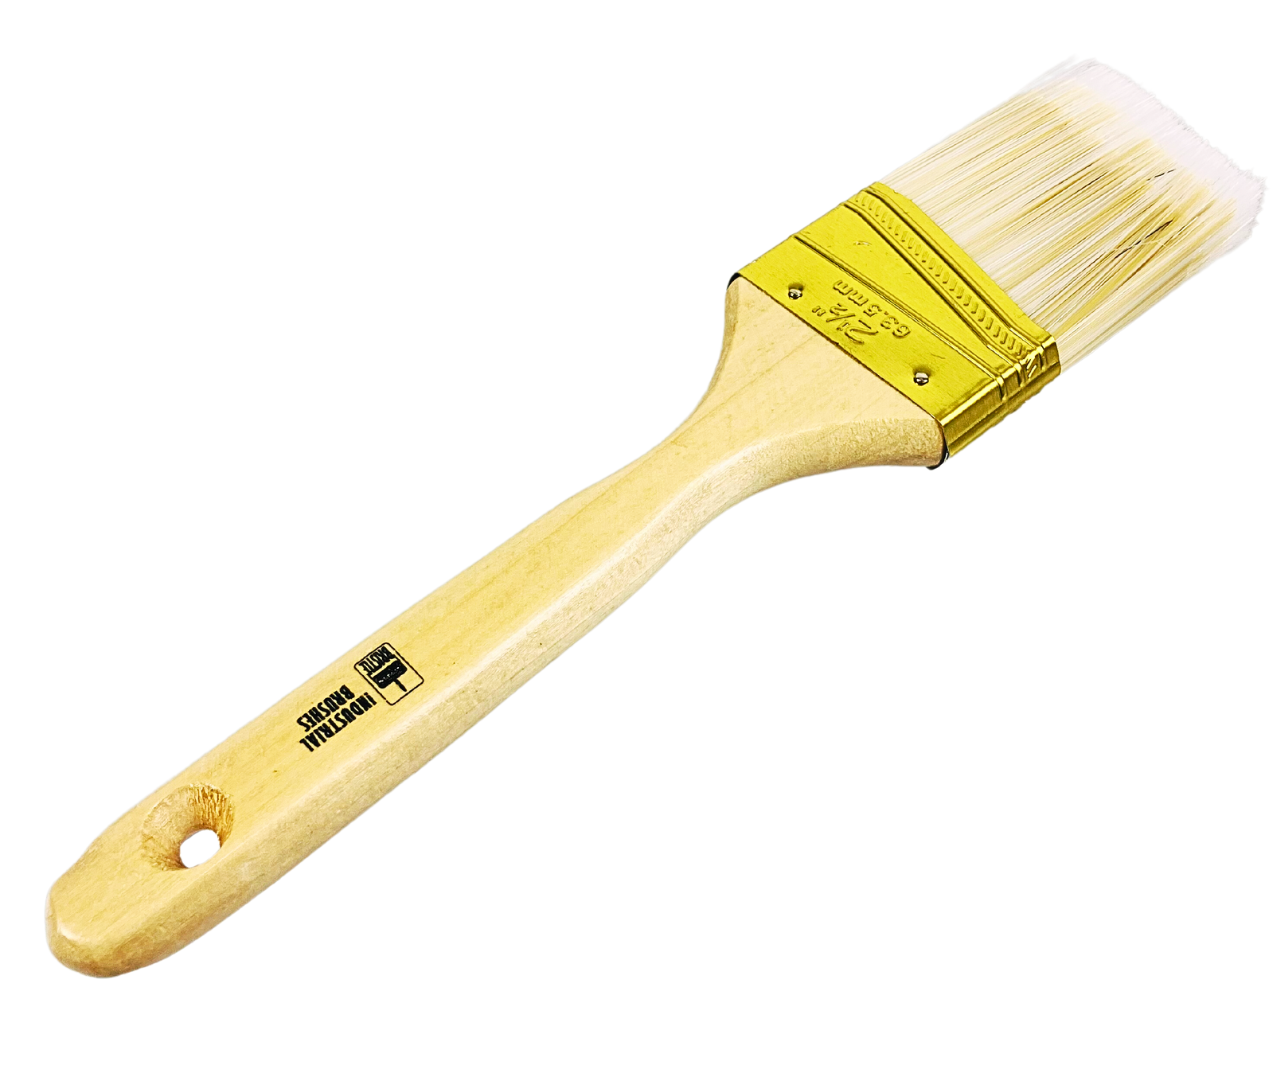 2.5" Wide Bristle Brush, for House Painting, Varnish or Lacquer (Pack of: 2) - TZ636-250-Z02